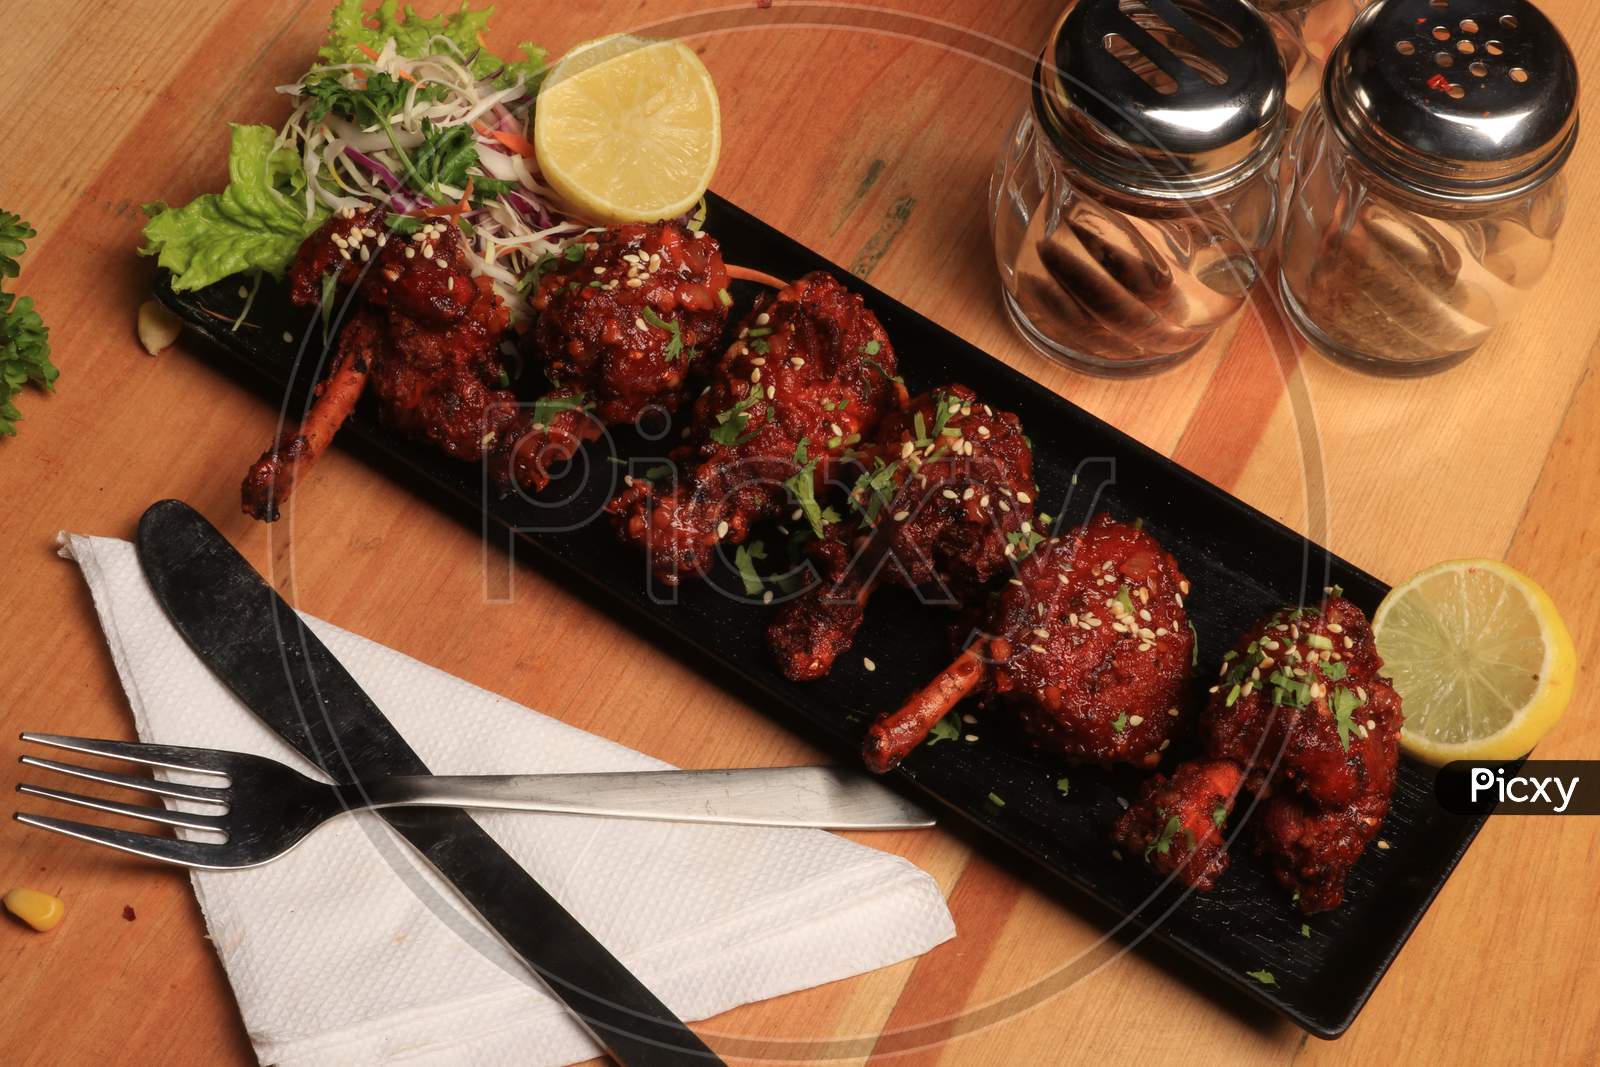 Chicken lollipop is Indian Chinese appetizer which is a frenched chicken winglet. wrapped with silver foil at one end & surved with chutney. Over colourful or wooden background. Selective focus.